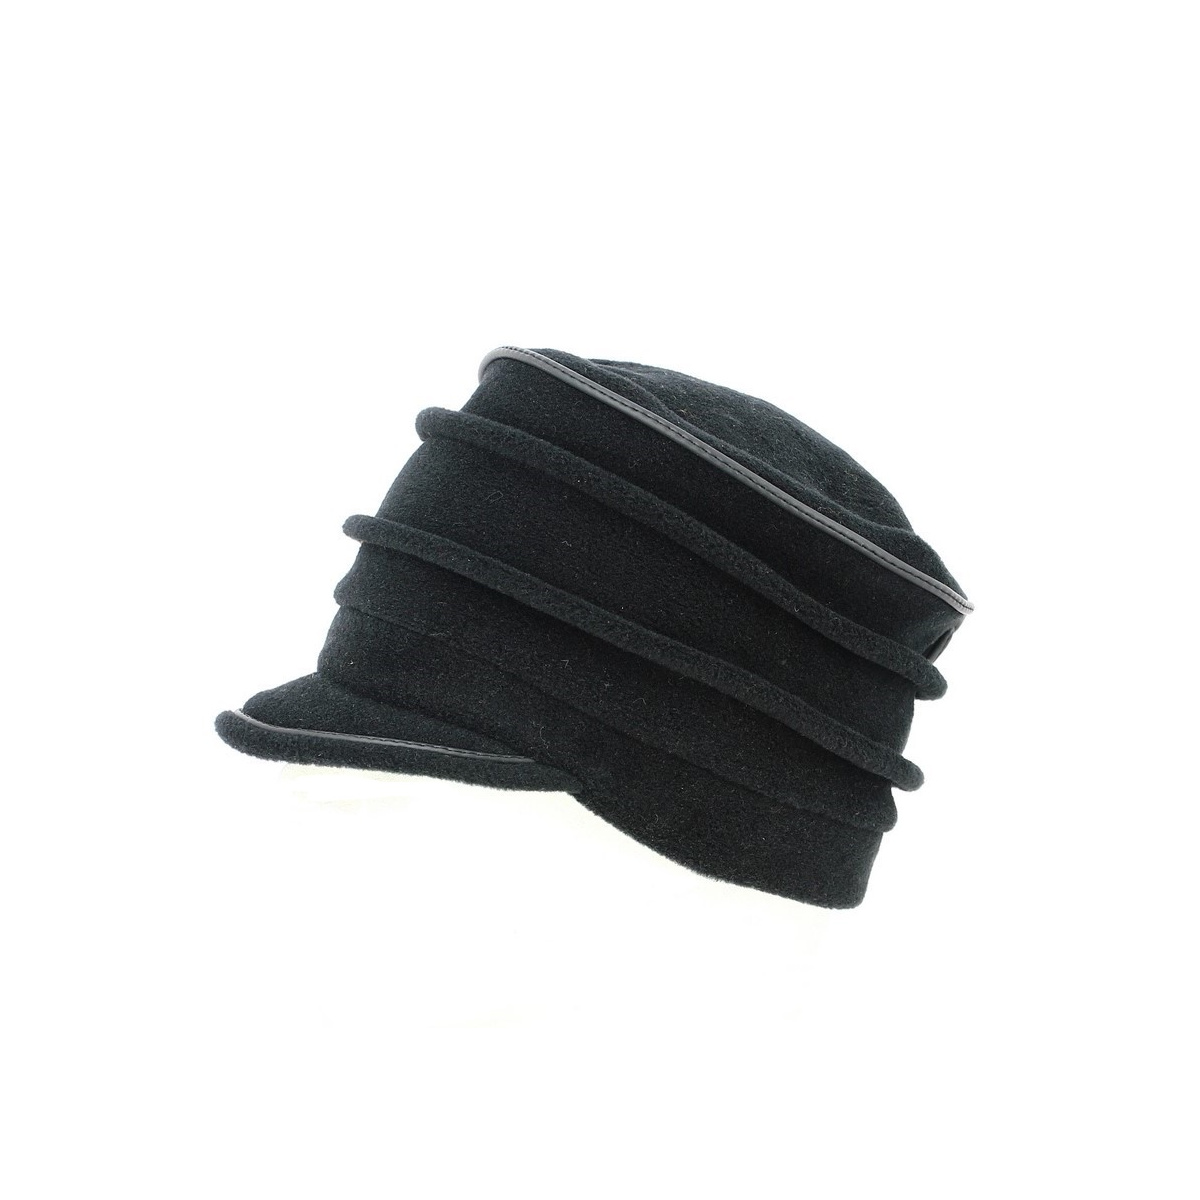 Casquette Femme Anna polaire NOIRE - TRACLET Reference : 13456